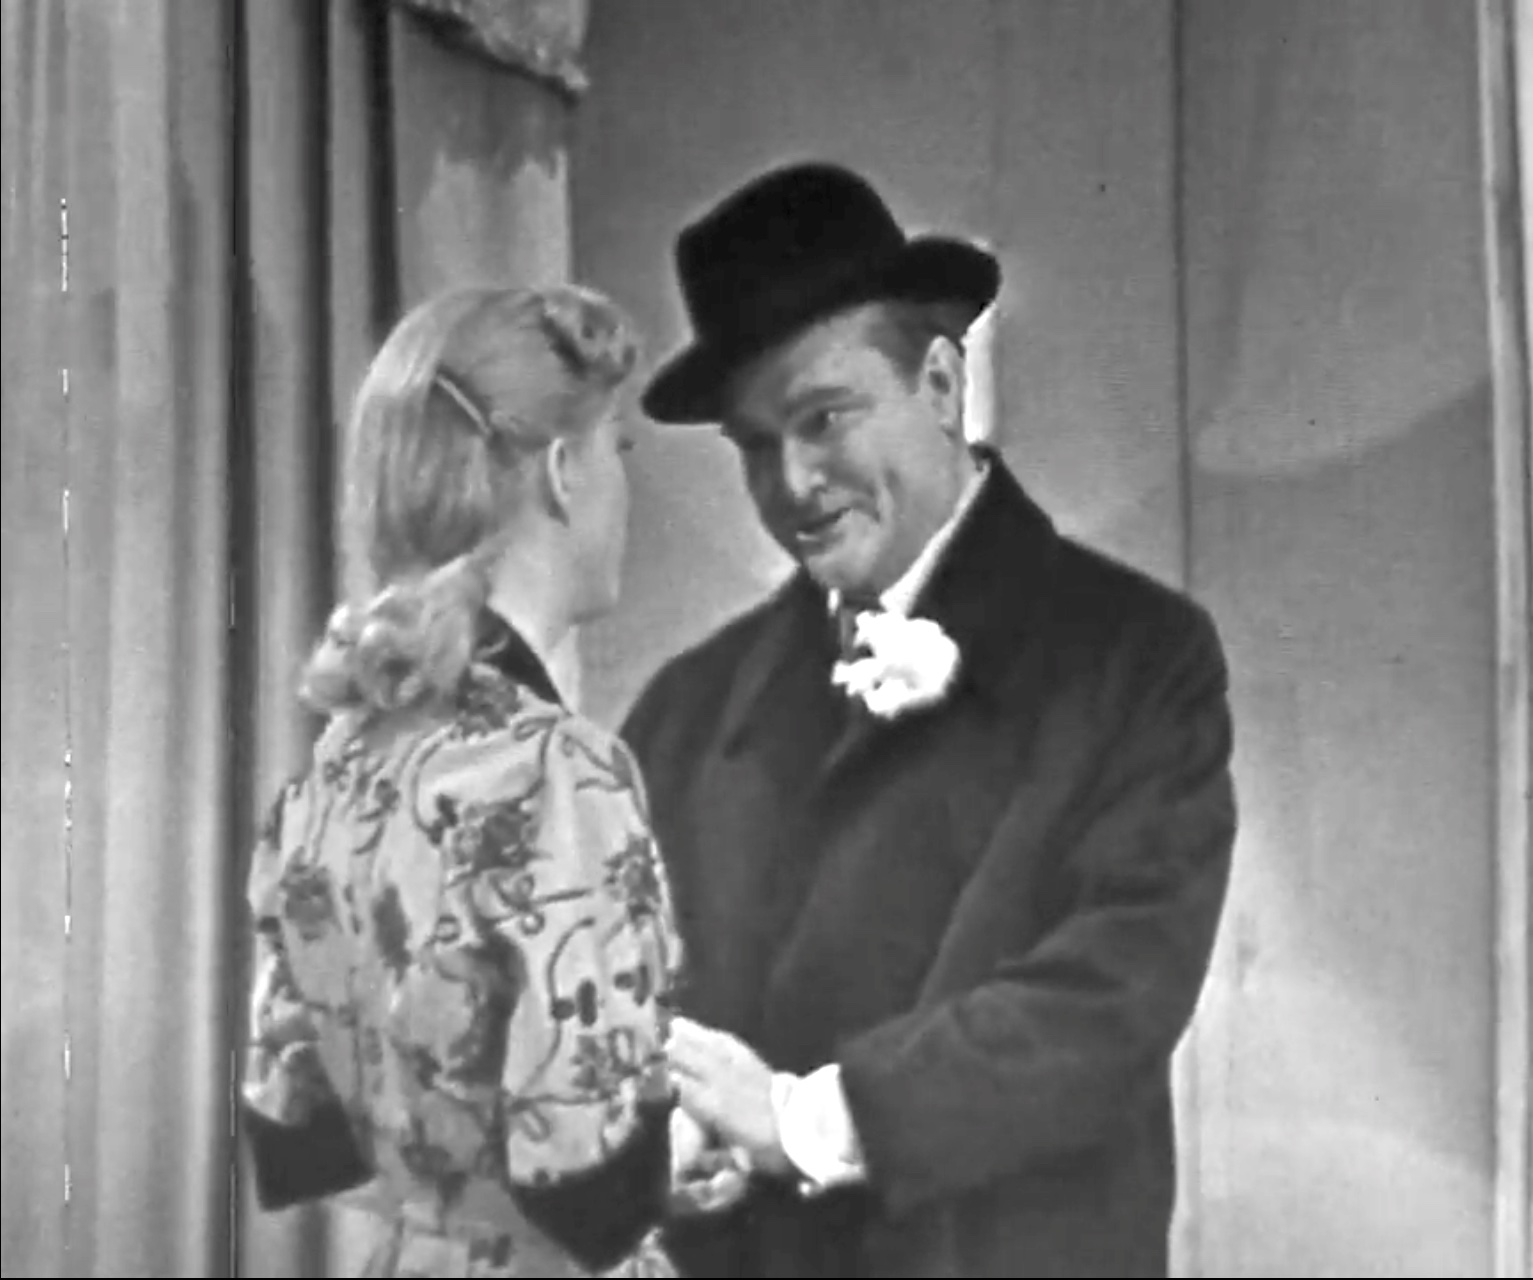 Married Red Skelton about to leave on his date with another woman in "Clem and the Married Life"